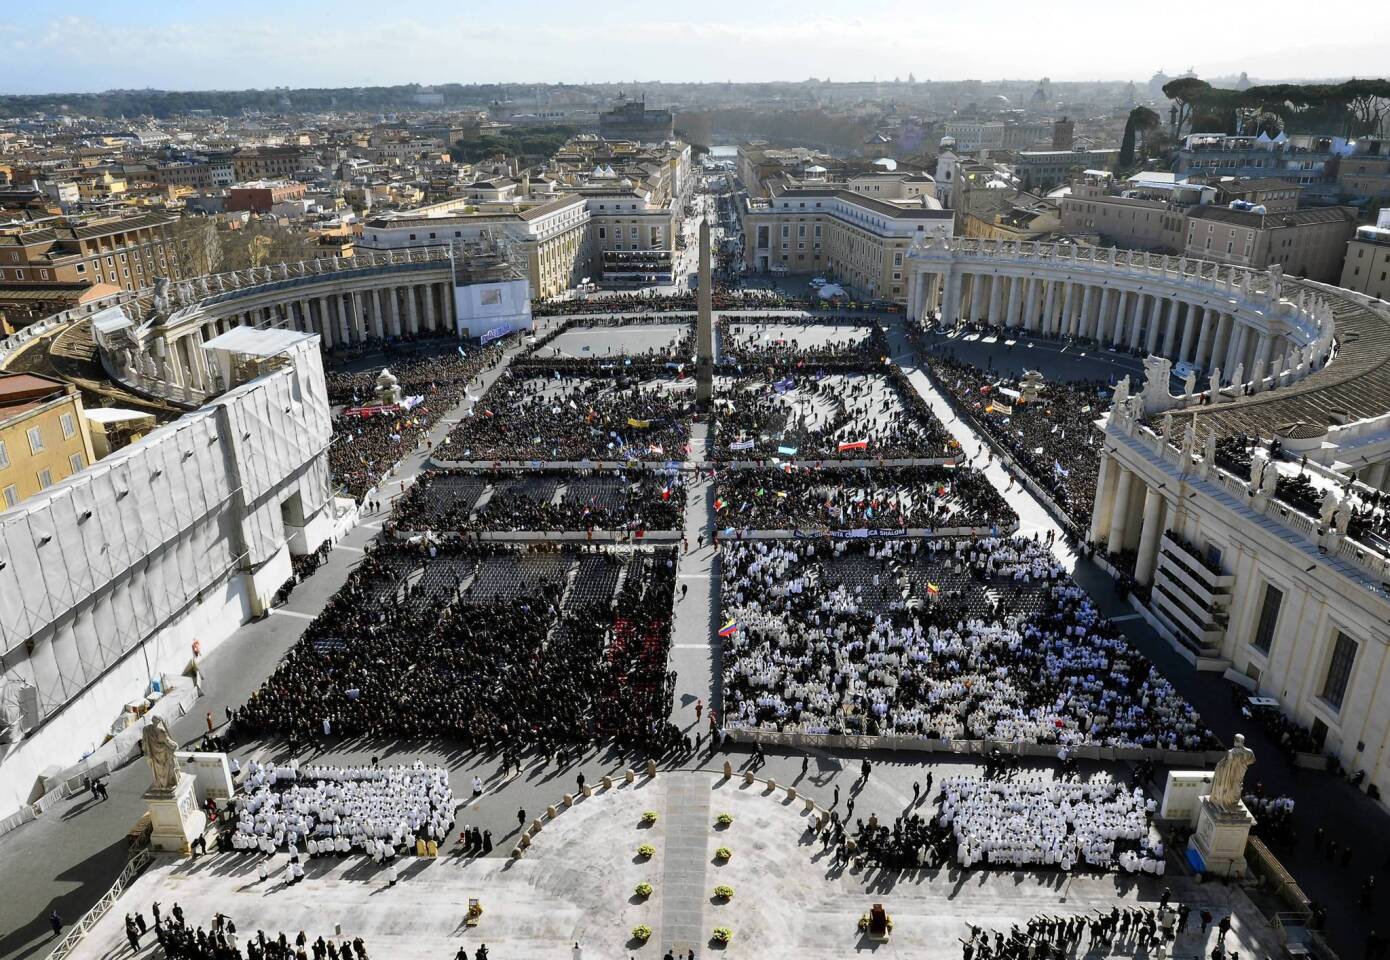 Faithful stand on St. Peter's Square for Pope Francis' Inauguration Mass.